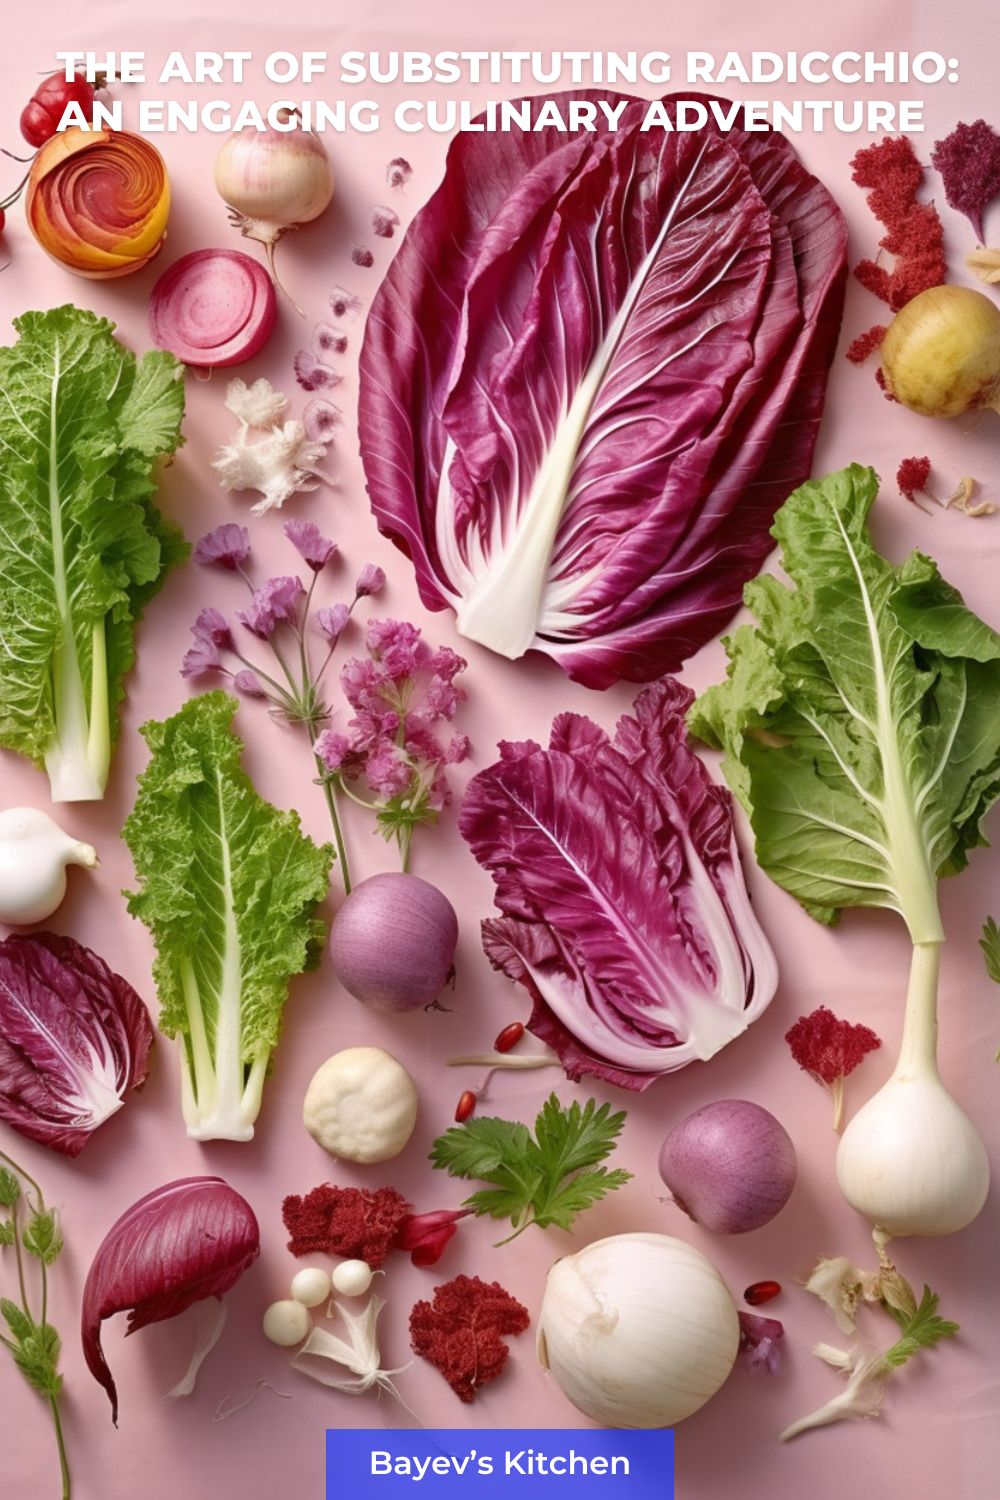 The Art of Substituting Radicchio: An Engaging Culinary Adventure by bayevskitchen.com